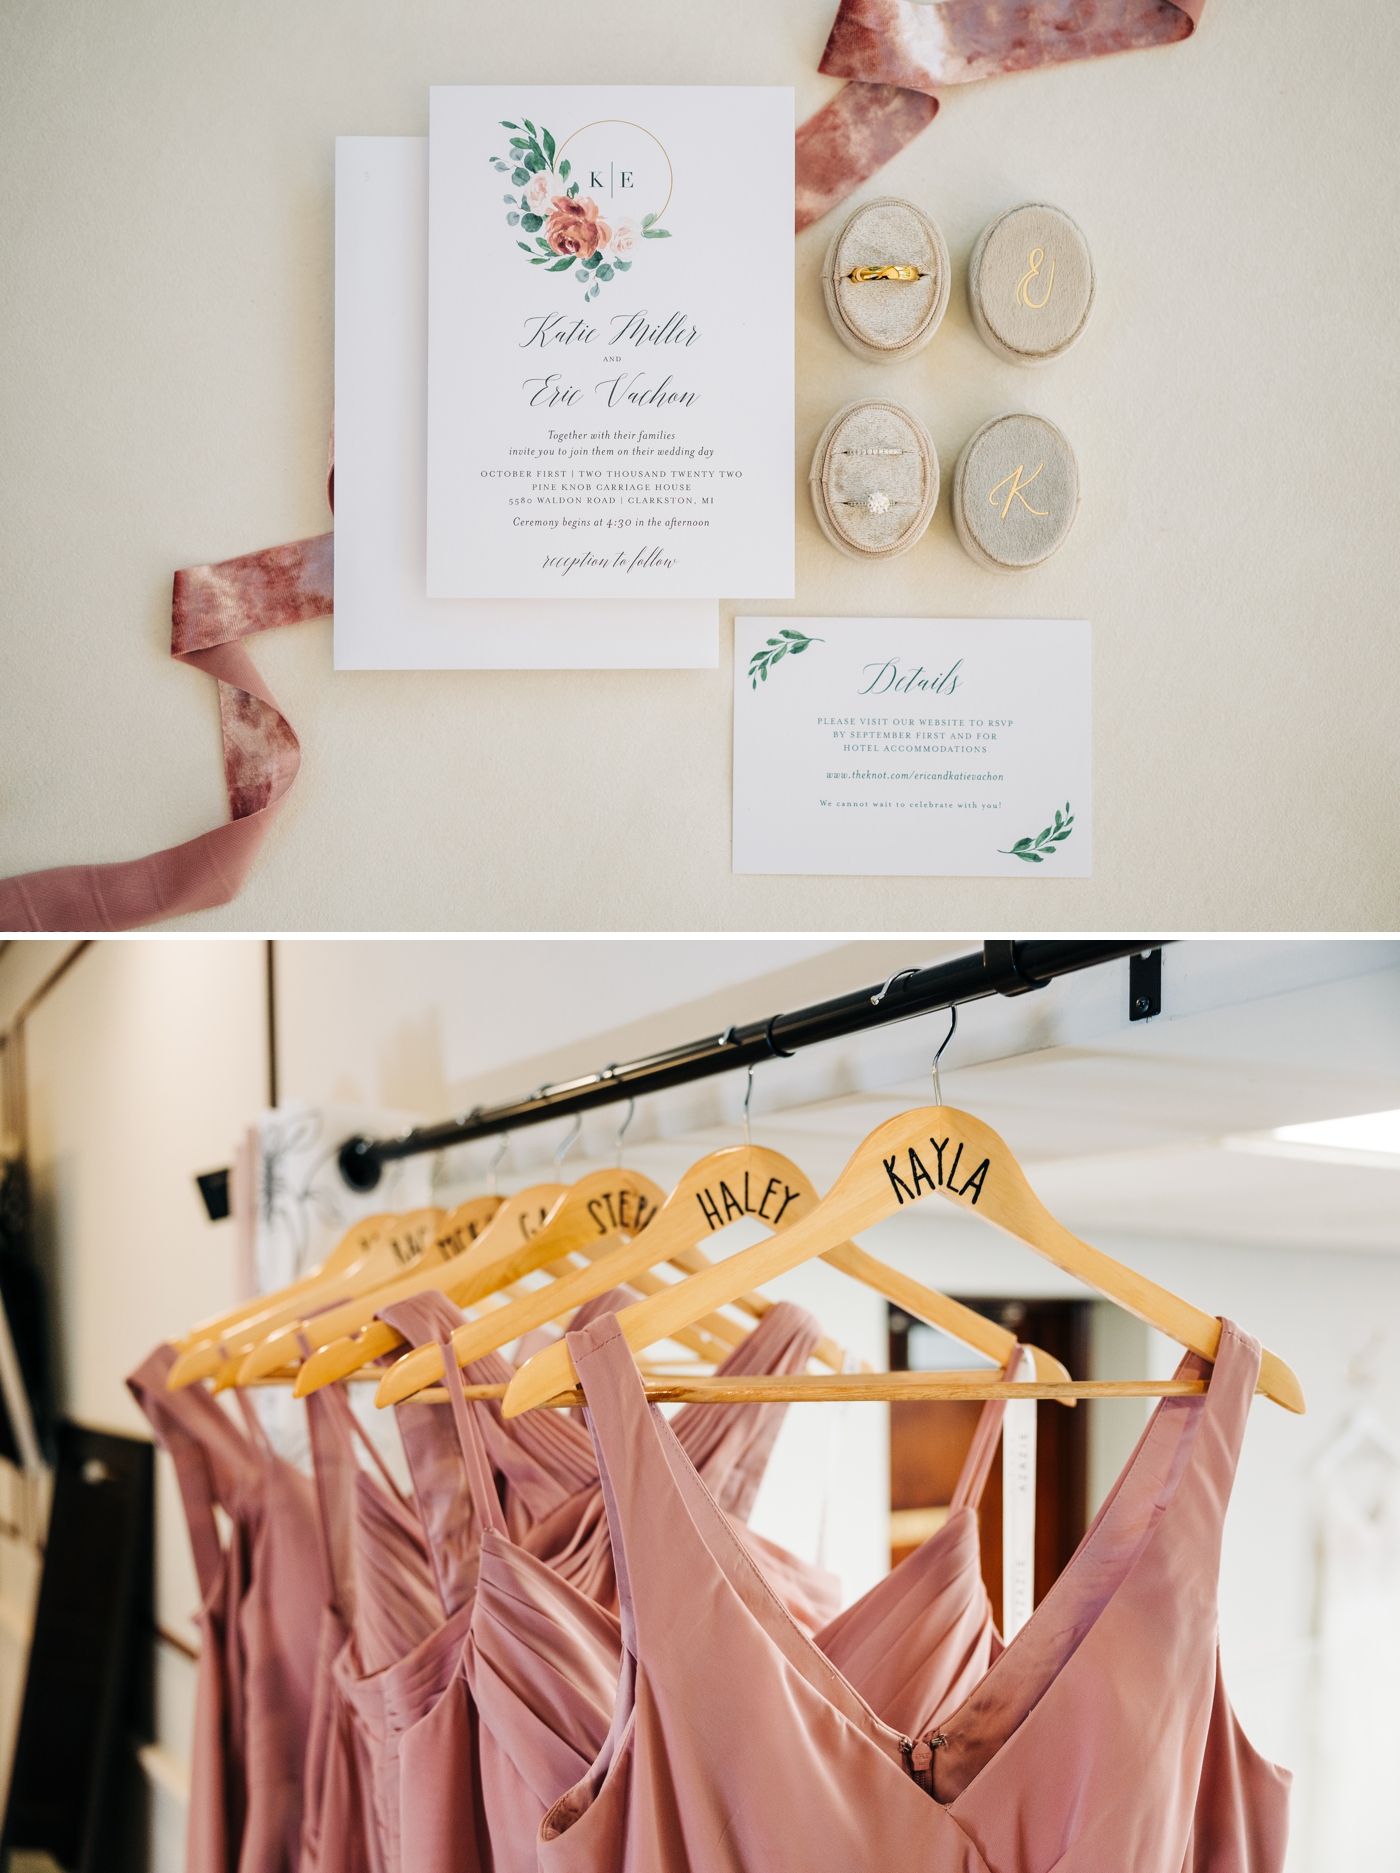 Wedding stationary and blush bridesmaids gowns